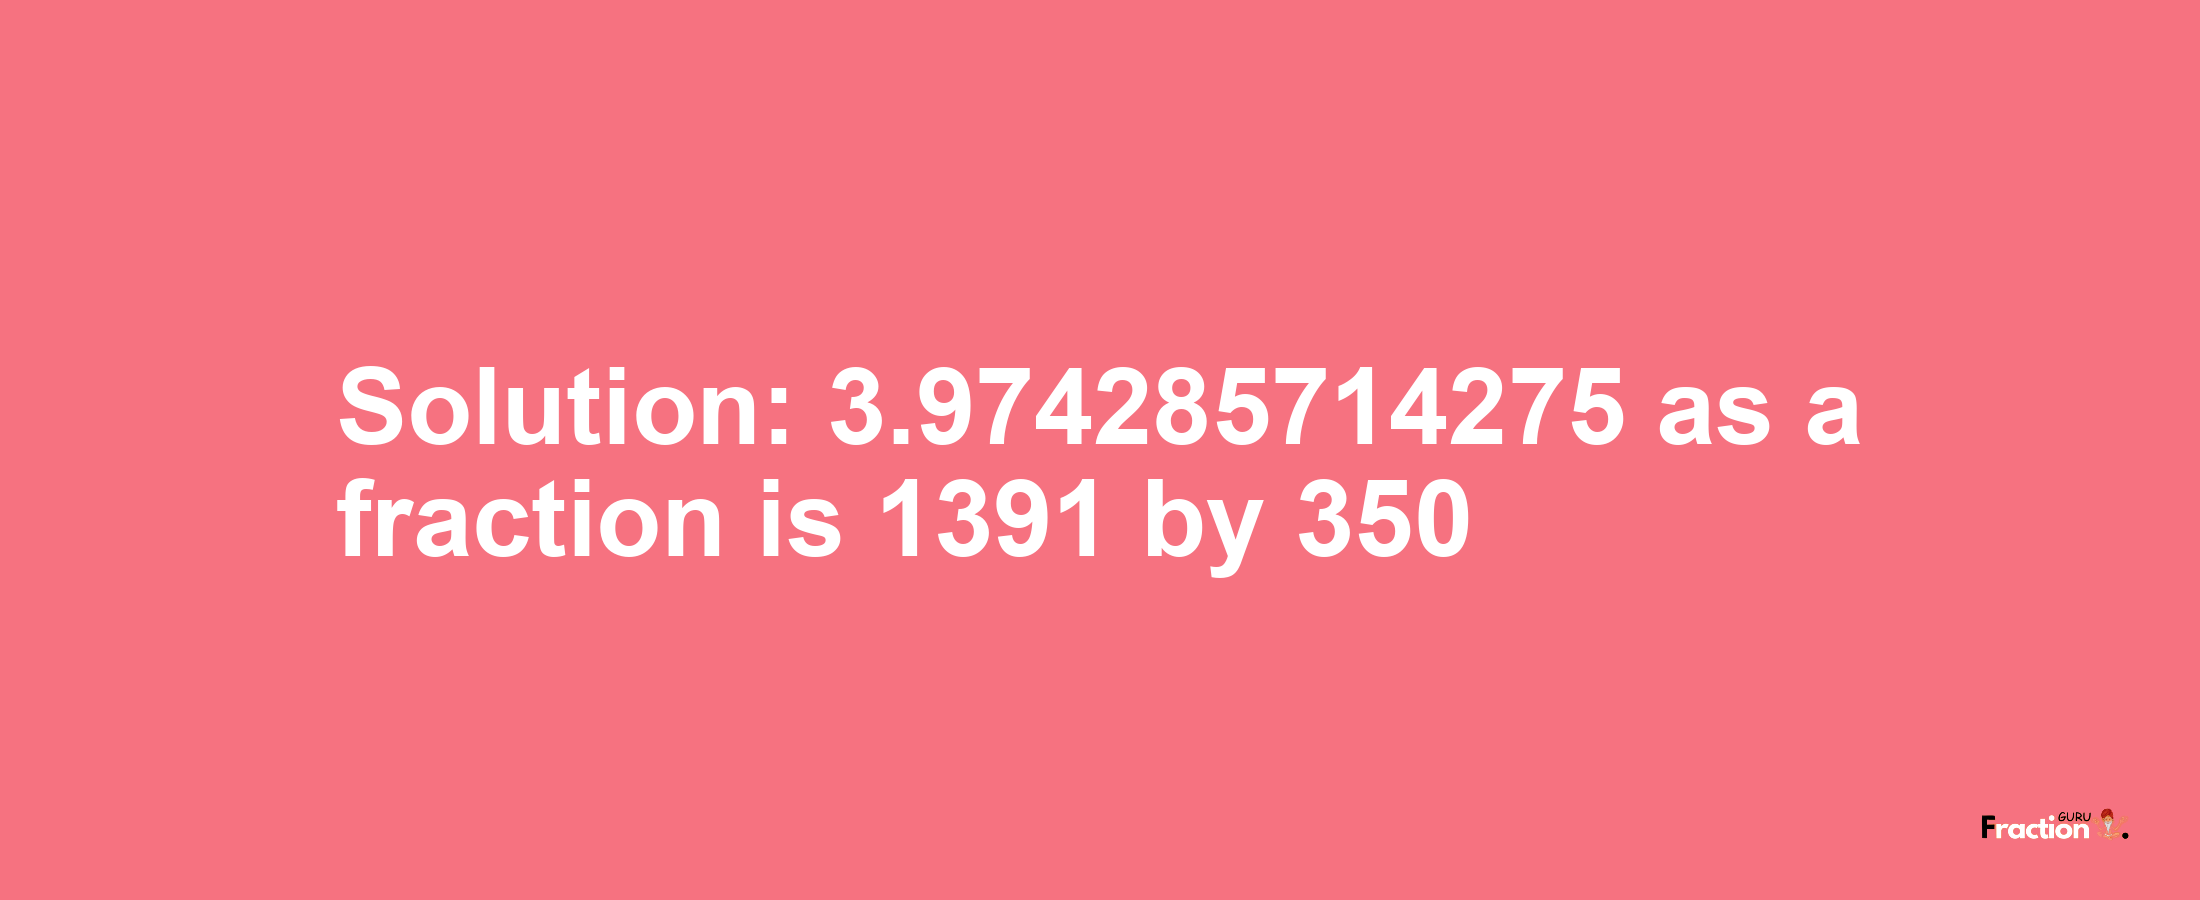 Solution:3.974285714275 as a fraction is 1391/350